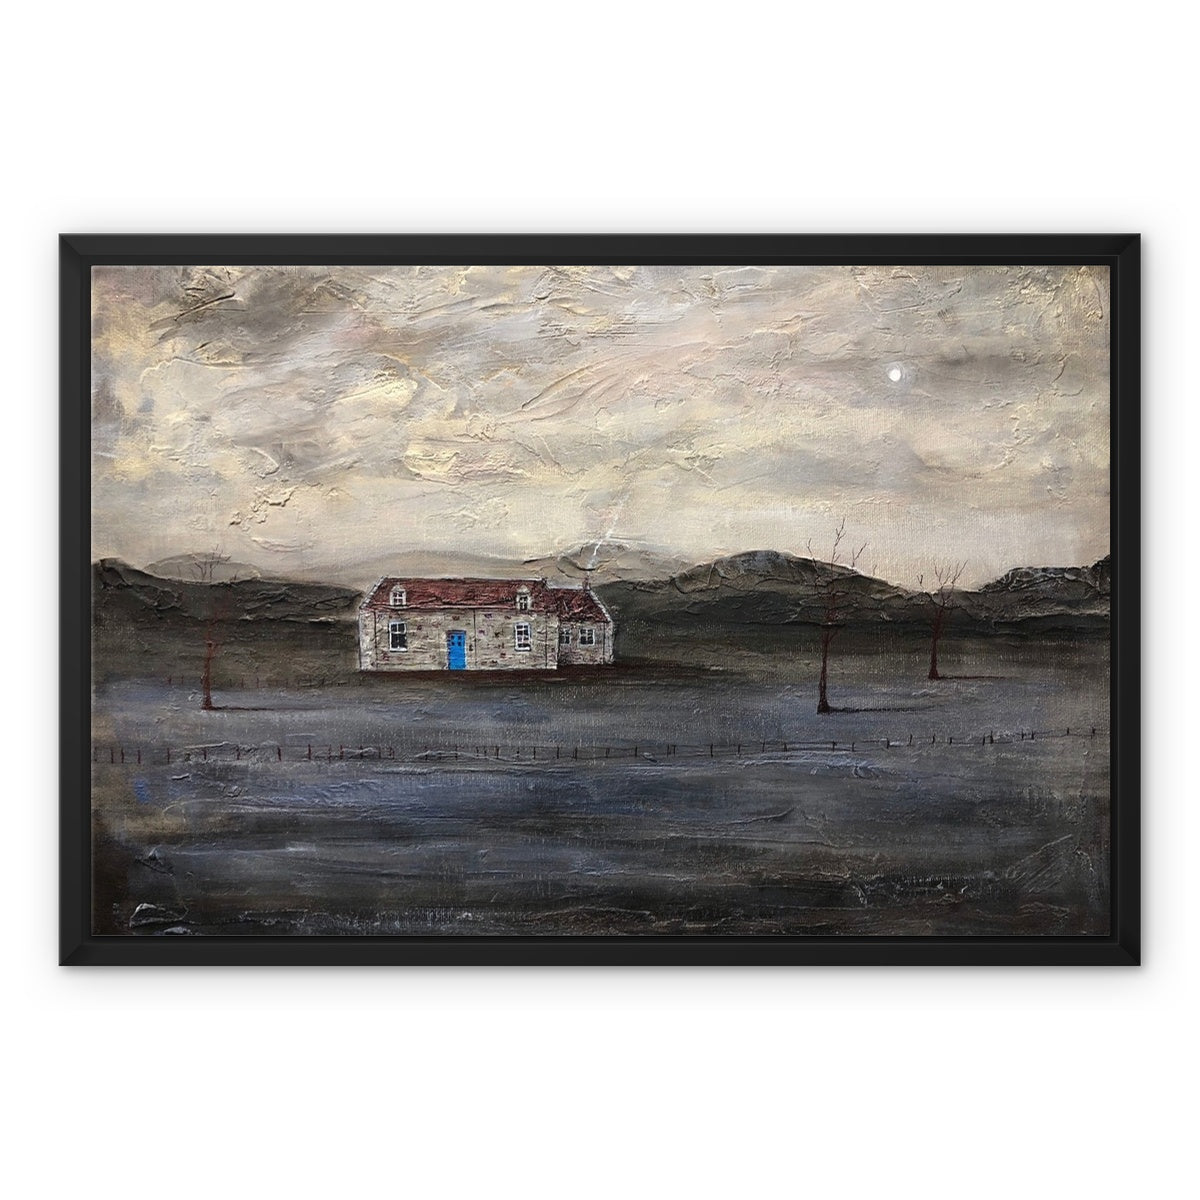 The Blue Door Burn Altmore Cottage Painting | Framed Canvas From Scotland-Floating Framed Canvas Prints-Scottish Highlands & Lowlands Art Gallery-24"x18"-Black Frame-Paintings, Prints, Homeware, Art Gifts From Scotland By Scottish Artist Kevin Hunter